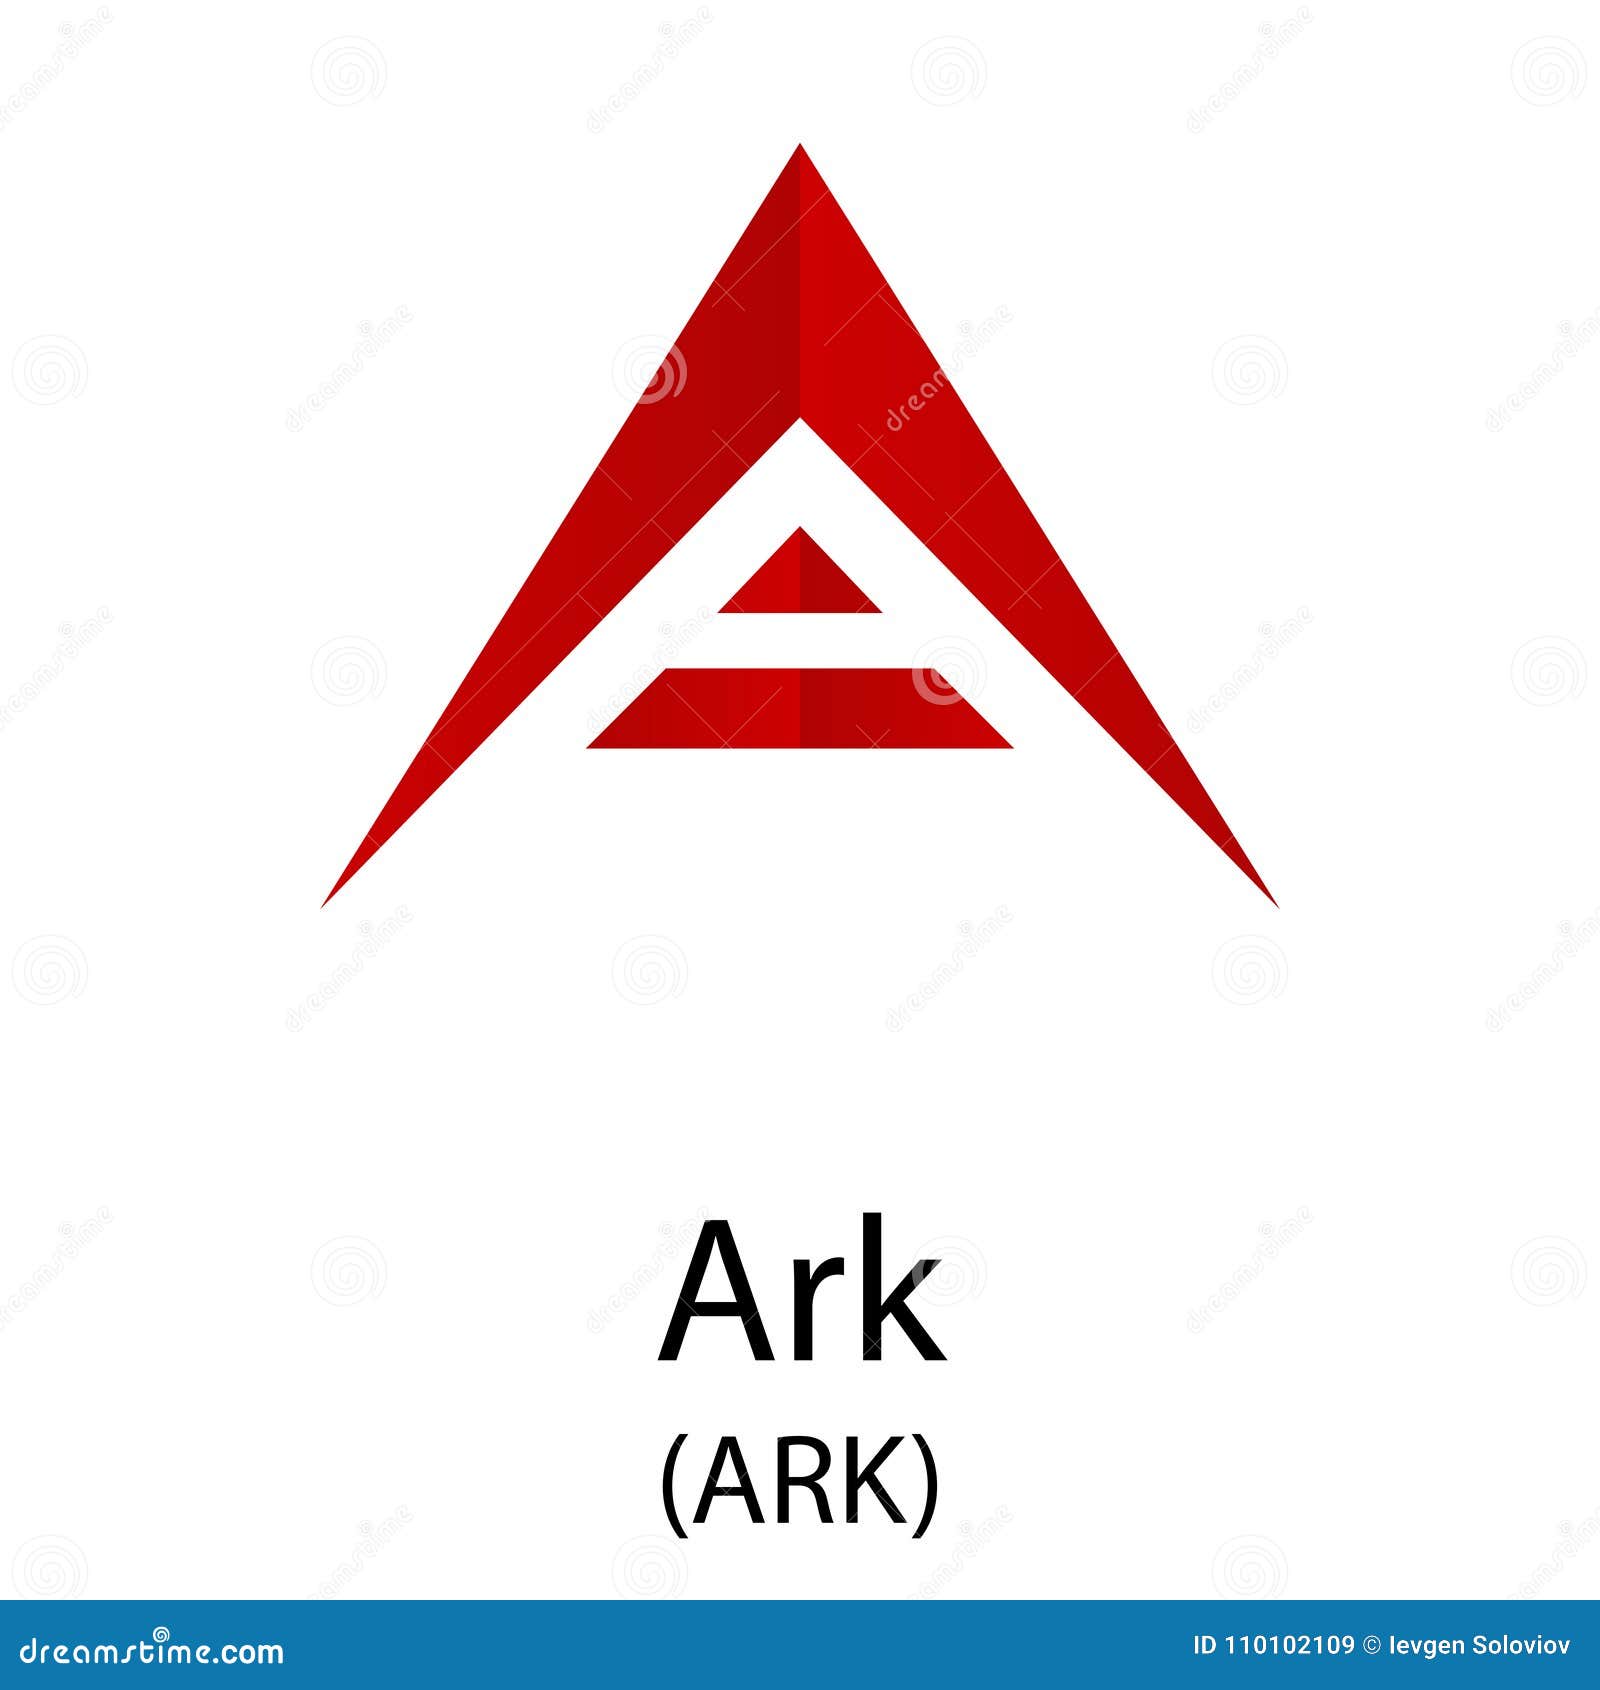 Ark cryptocurrency symbol stock vector. Illustration of ...